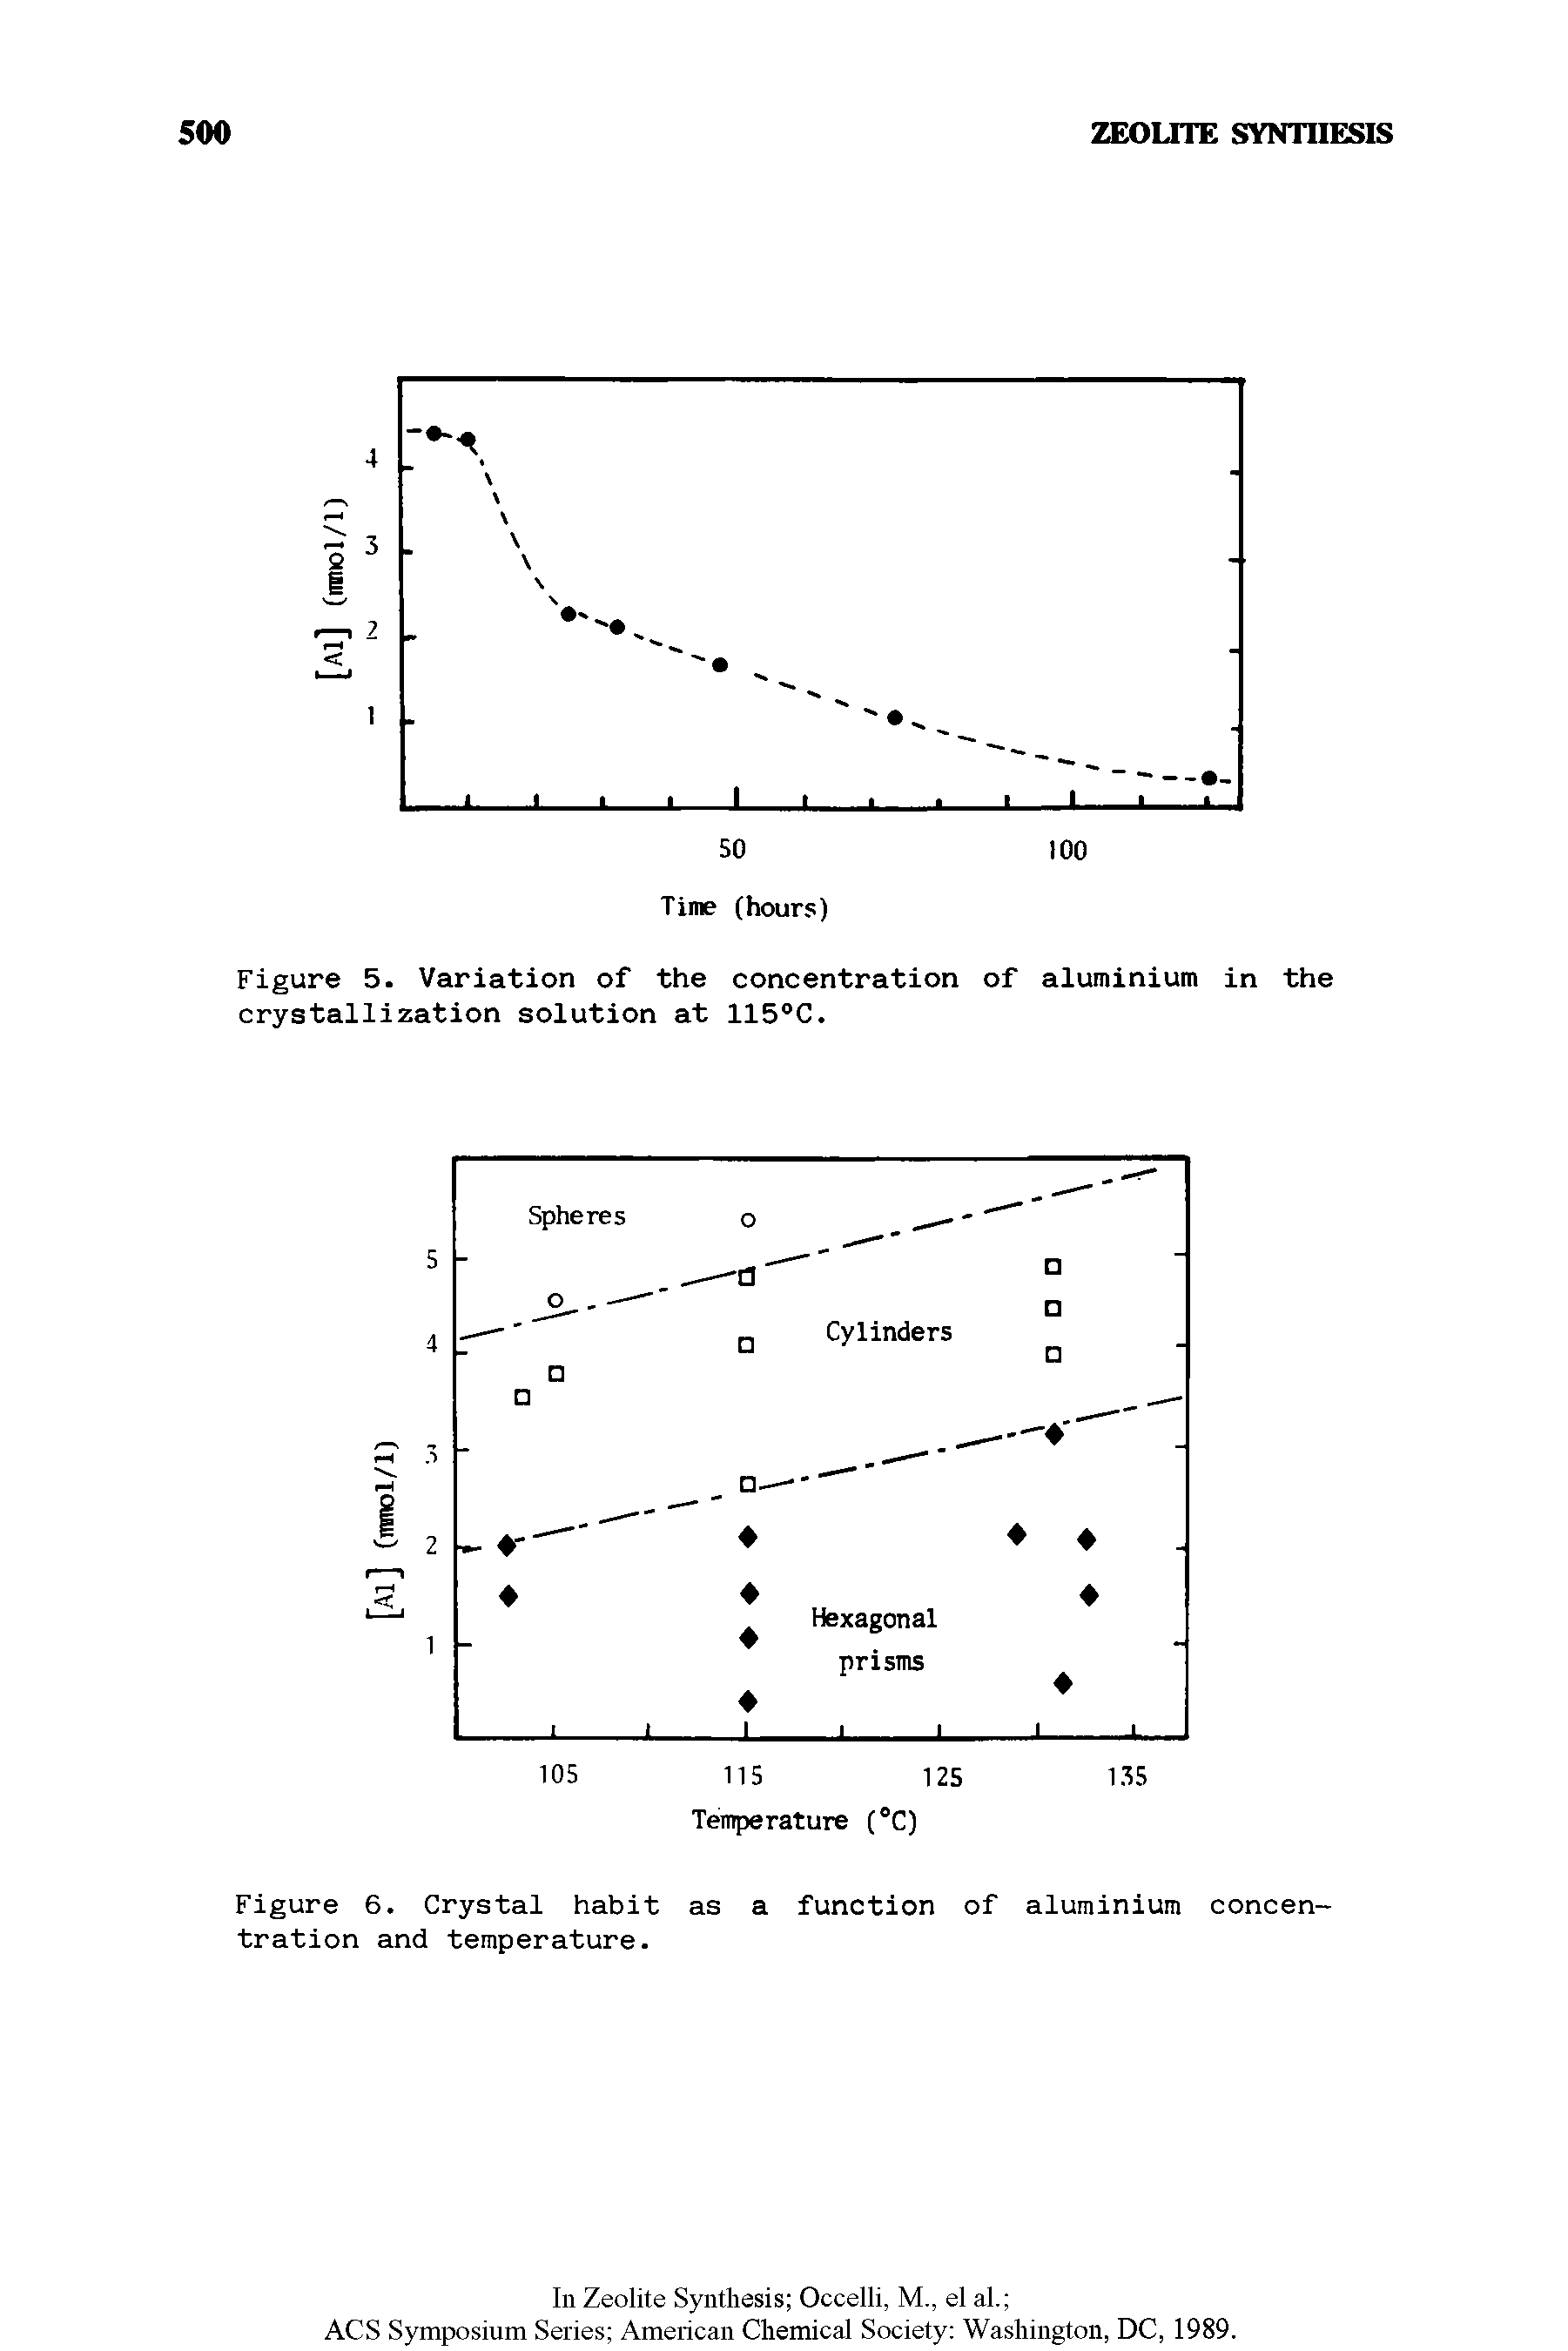 Figure 6. Crystal habit as a function of aluminium concentration and temperature.